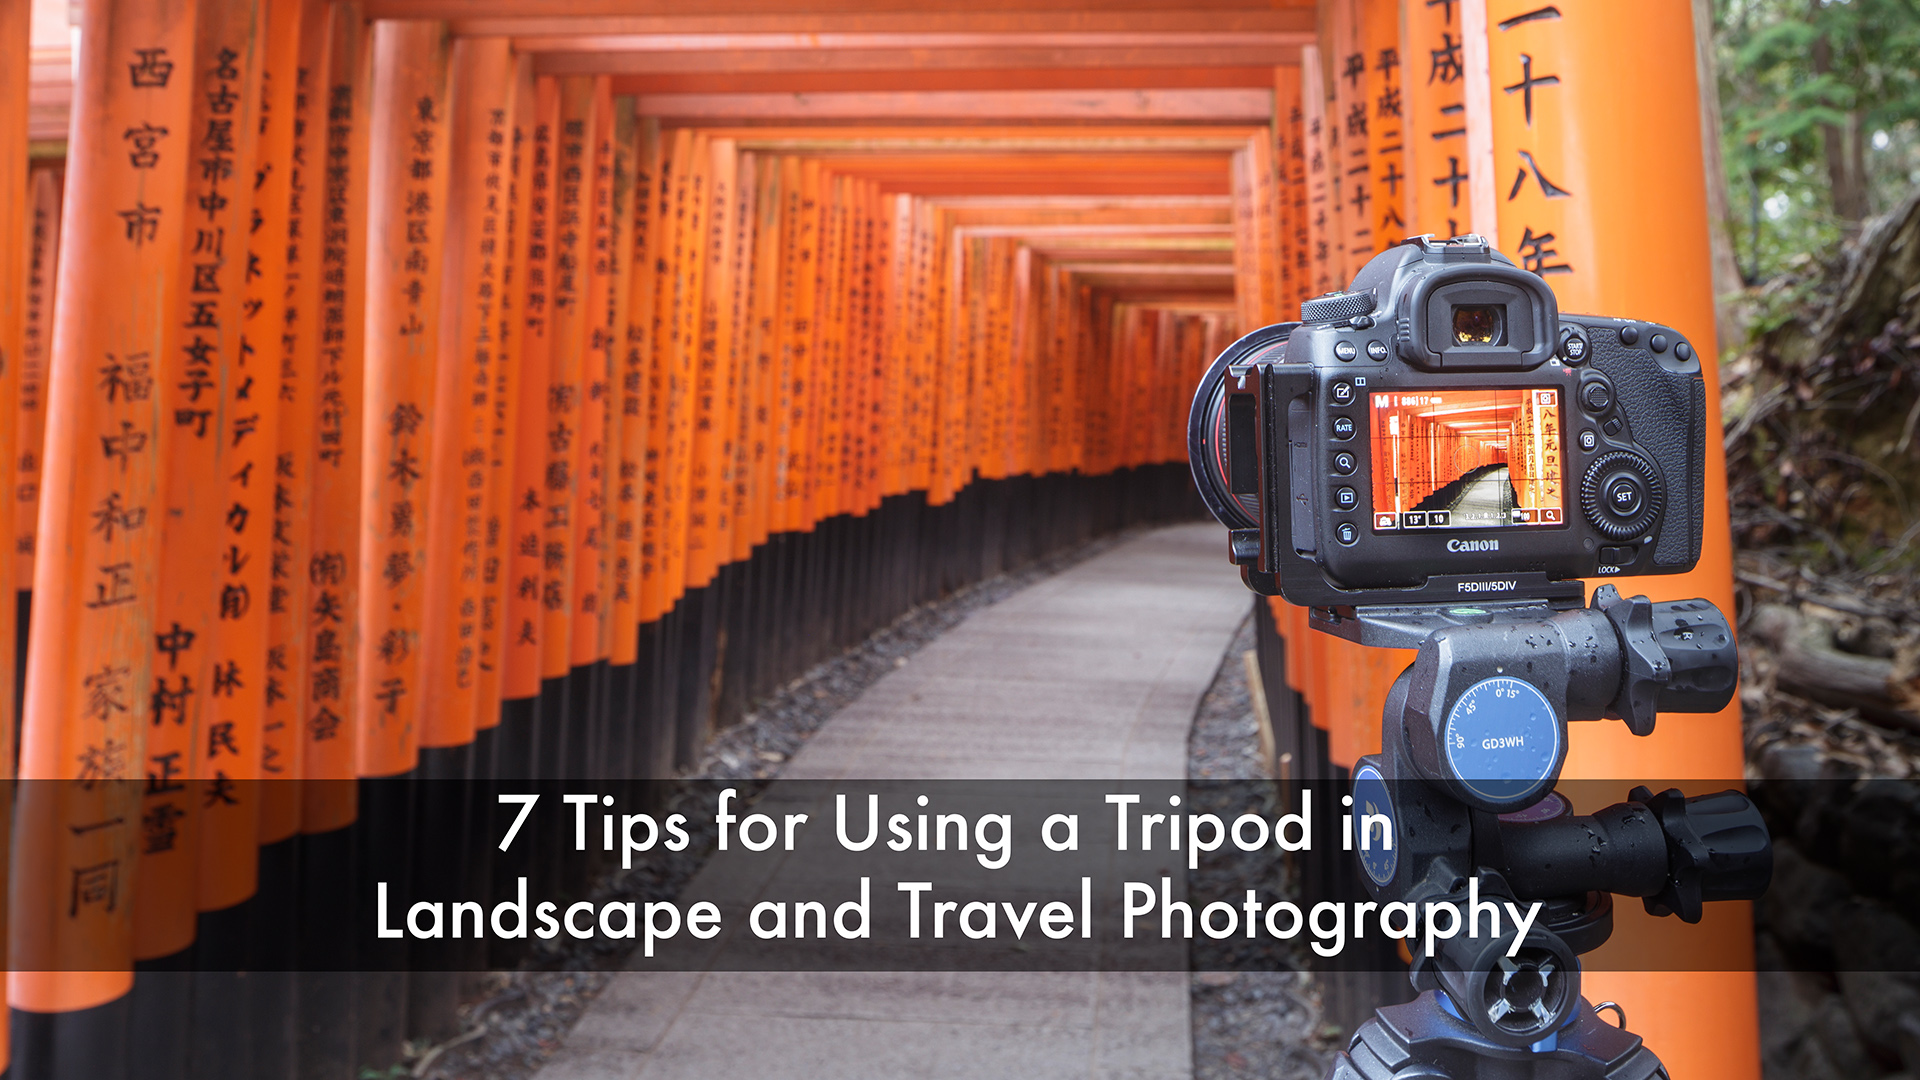 7 tips for using a tripod in landscape and travel photography